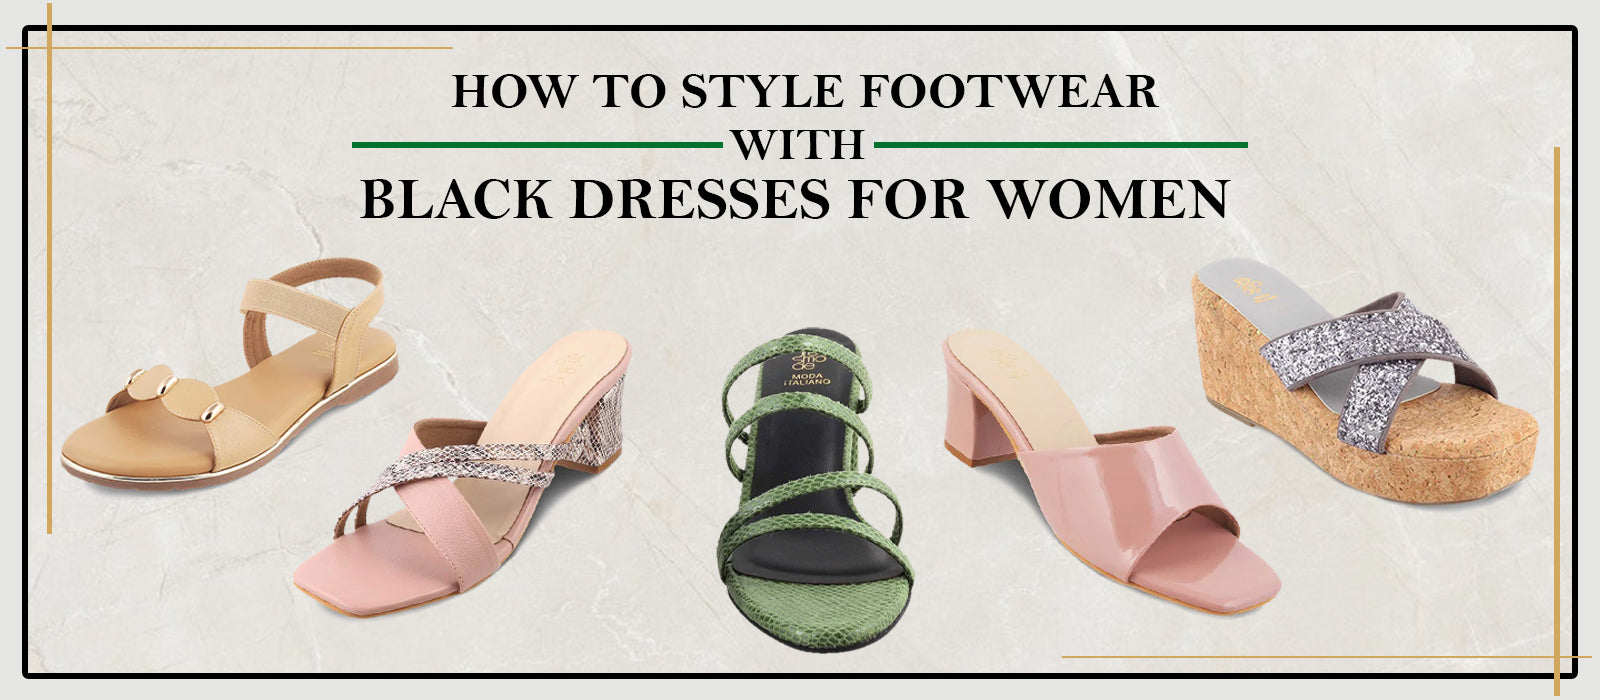 How to Style Footwear with Black Dresses for Women